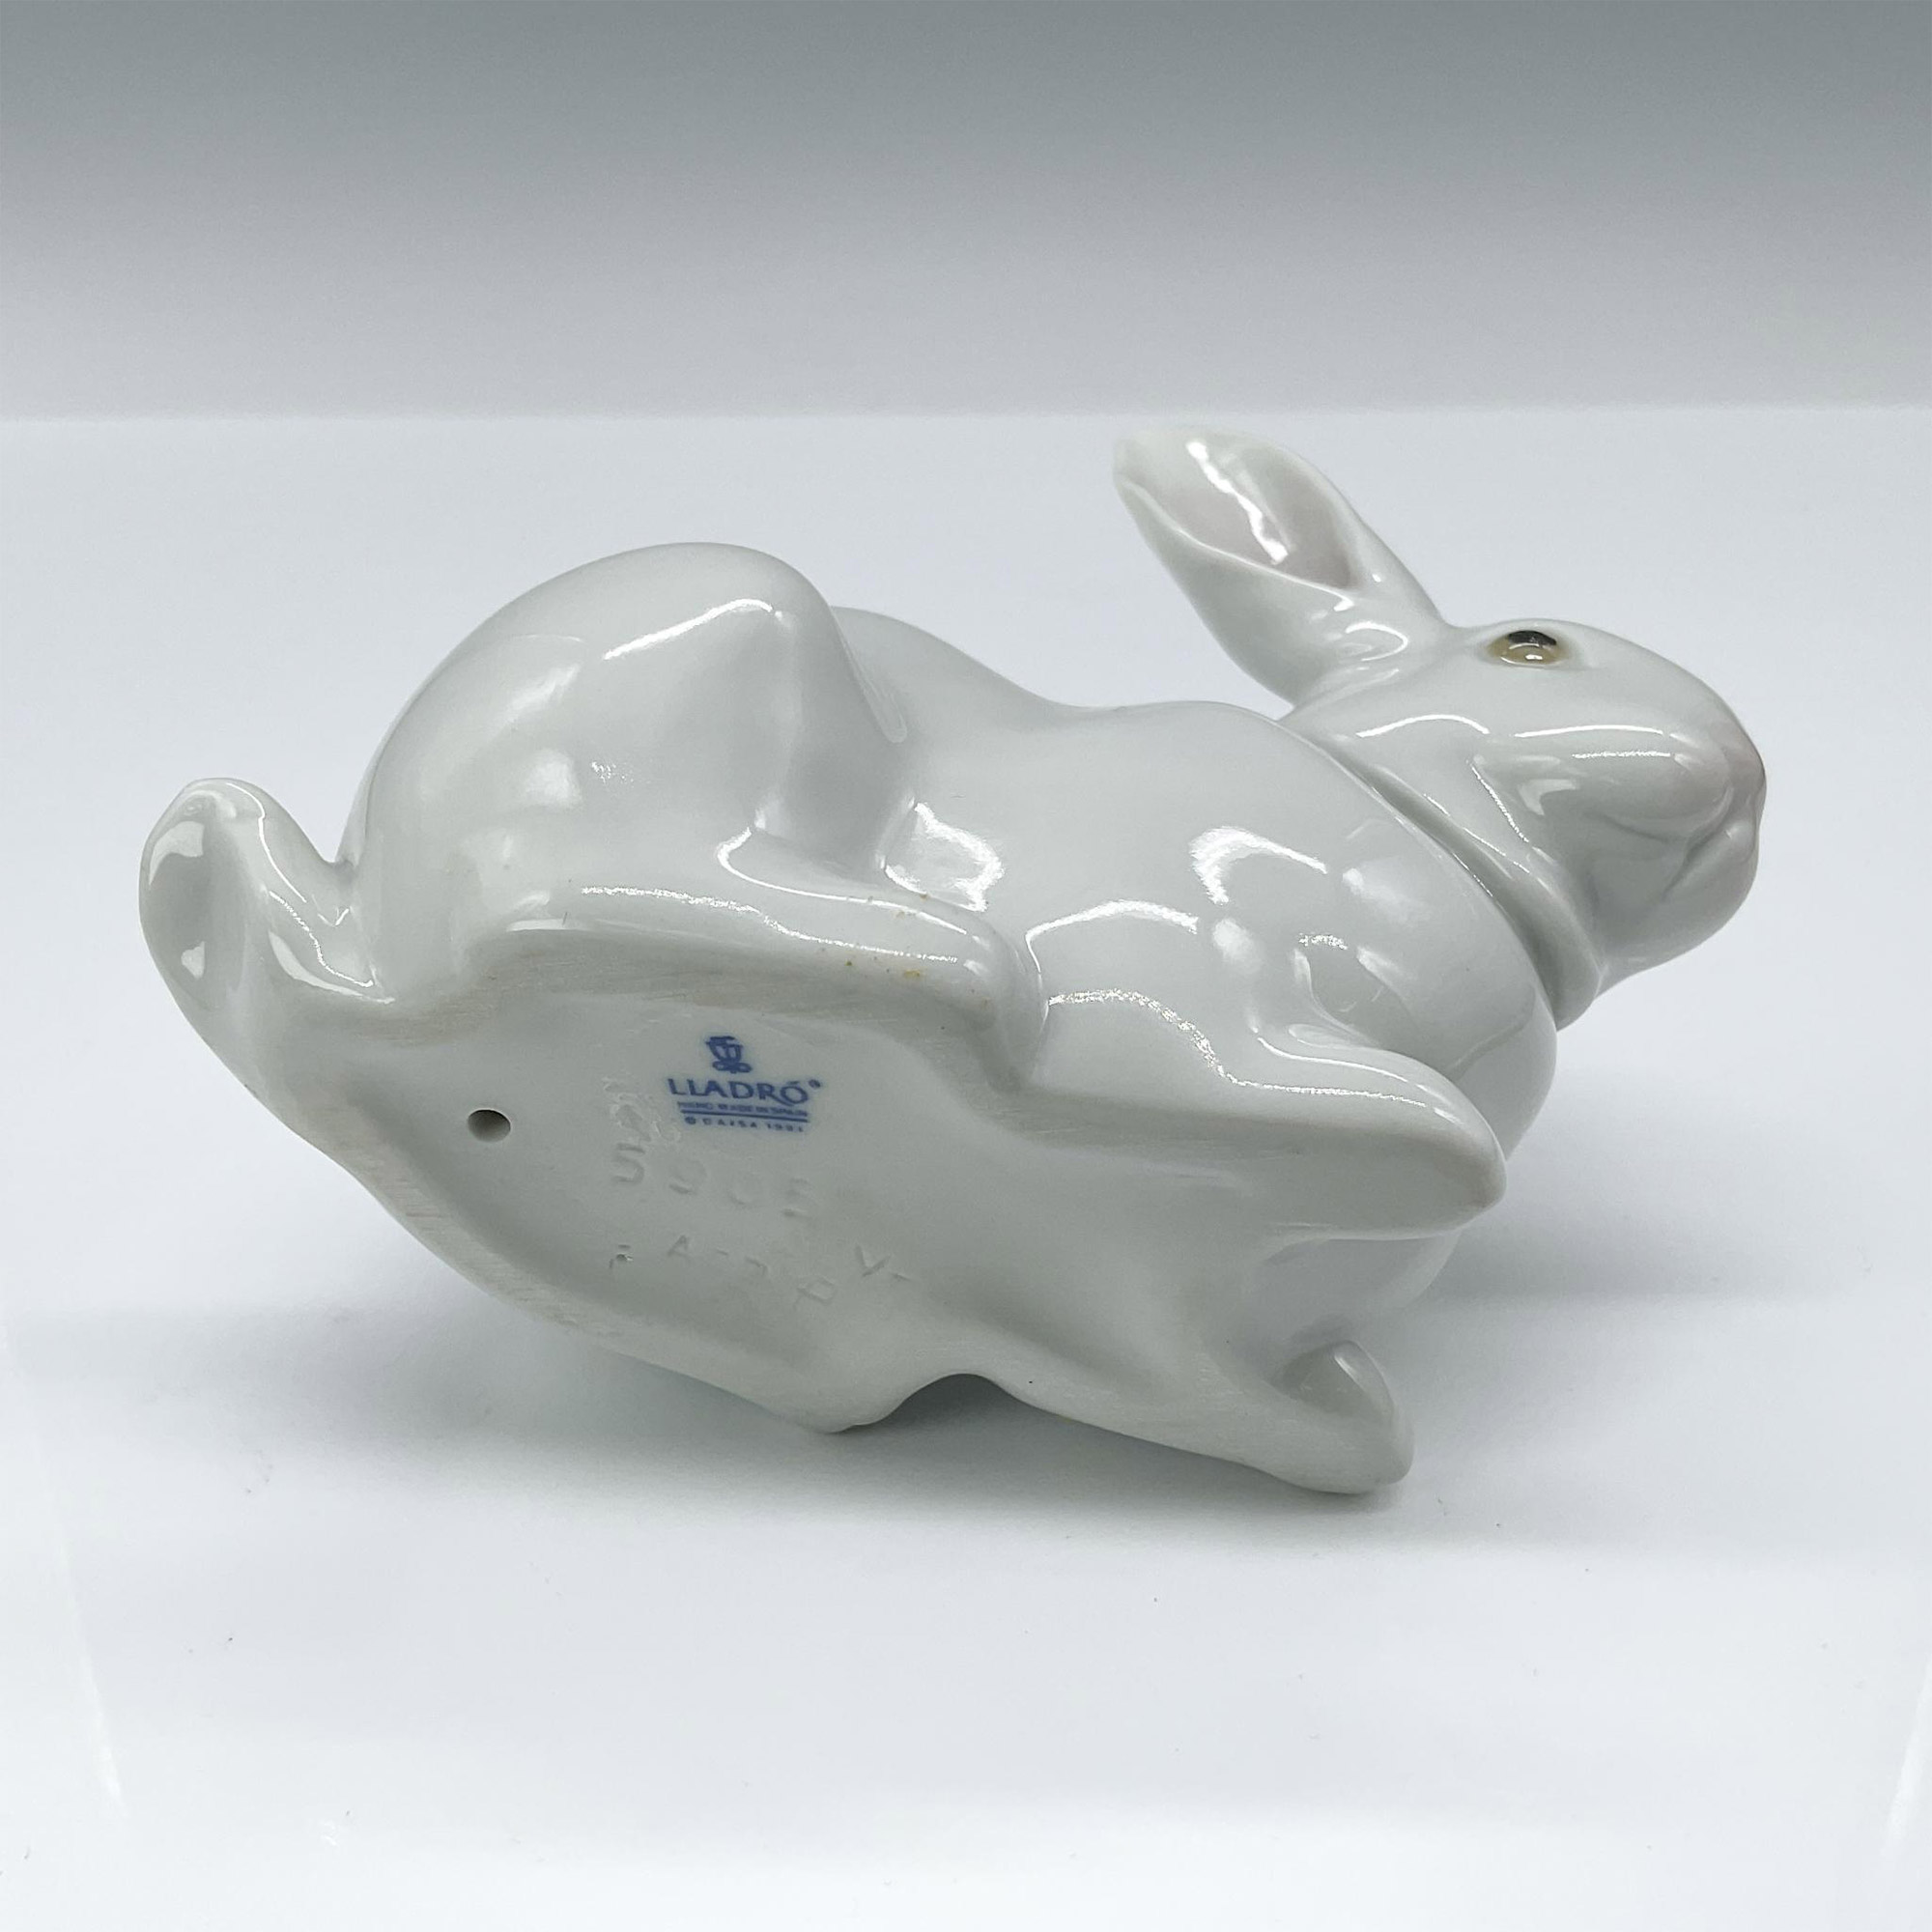 Attentive Bunny 1005905 - Lladro Porcelain Figurine - Image 3 of 3